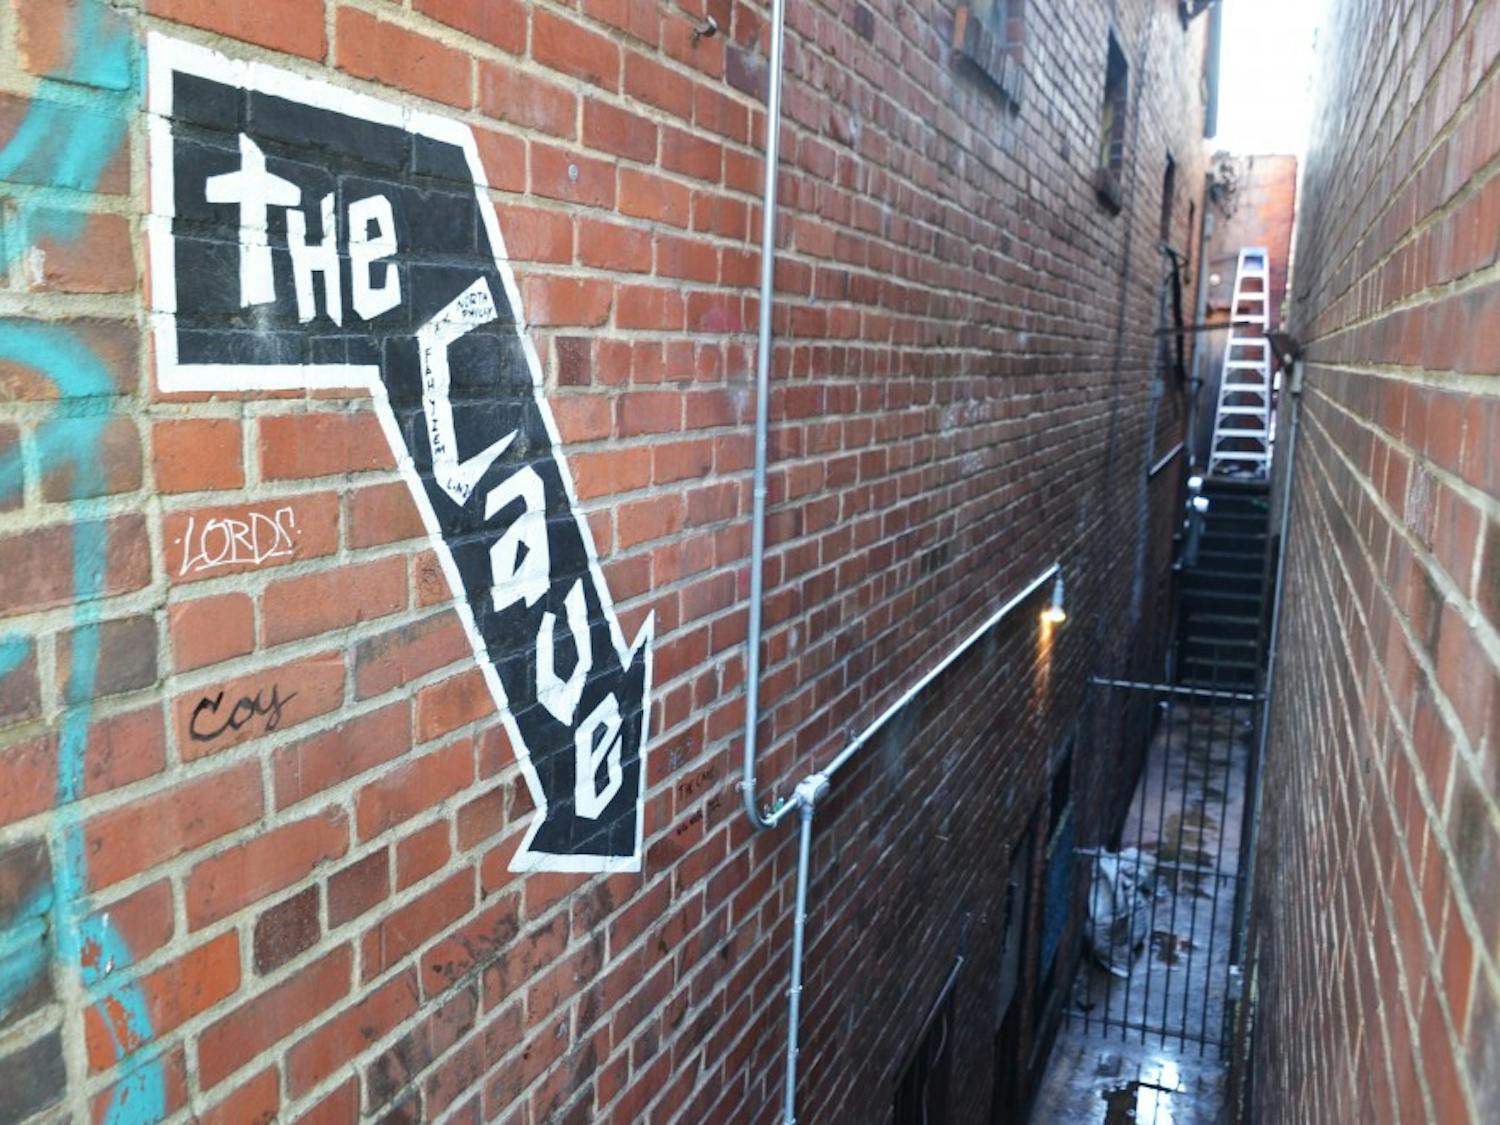 The Cave, a bar on West Franklin St., is set to re-open in June 2018 under new ownership.